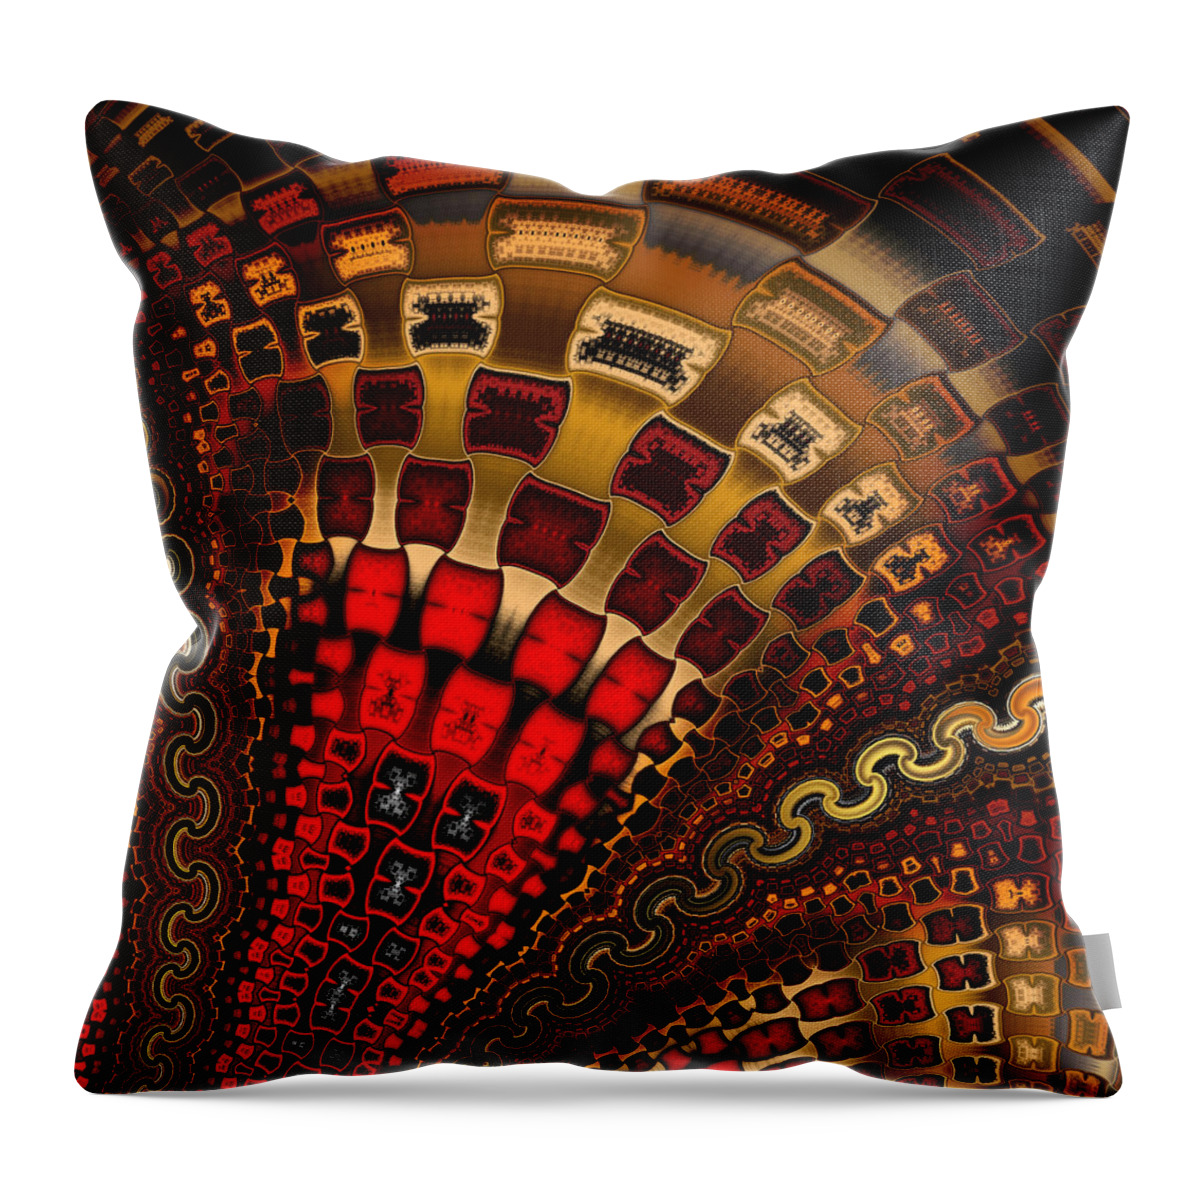 Vic Eberly Throw Pillow featuring the digital art The Announcement by Vic Eberly